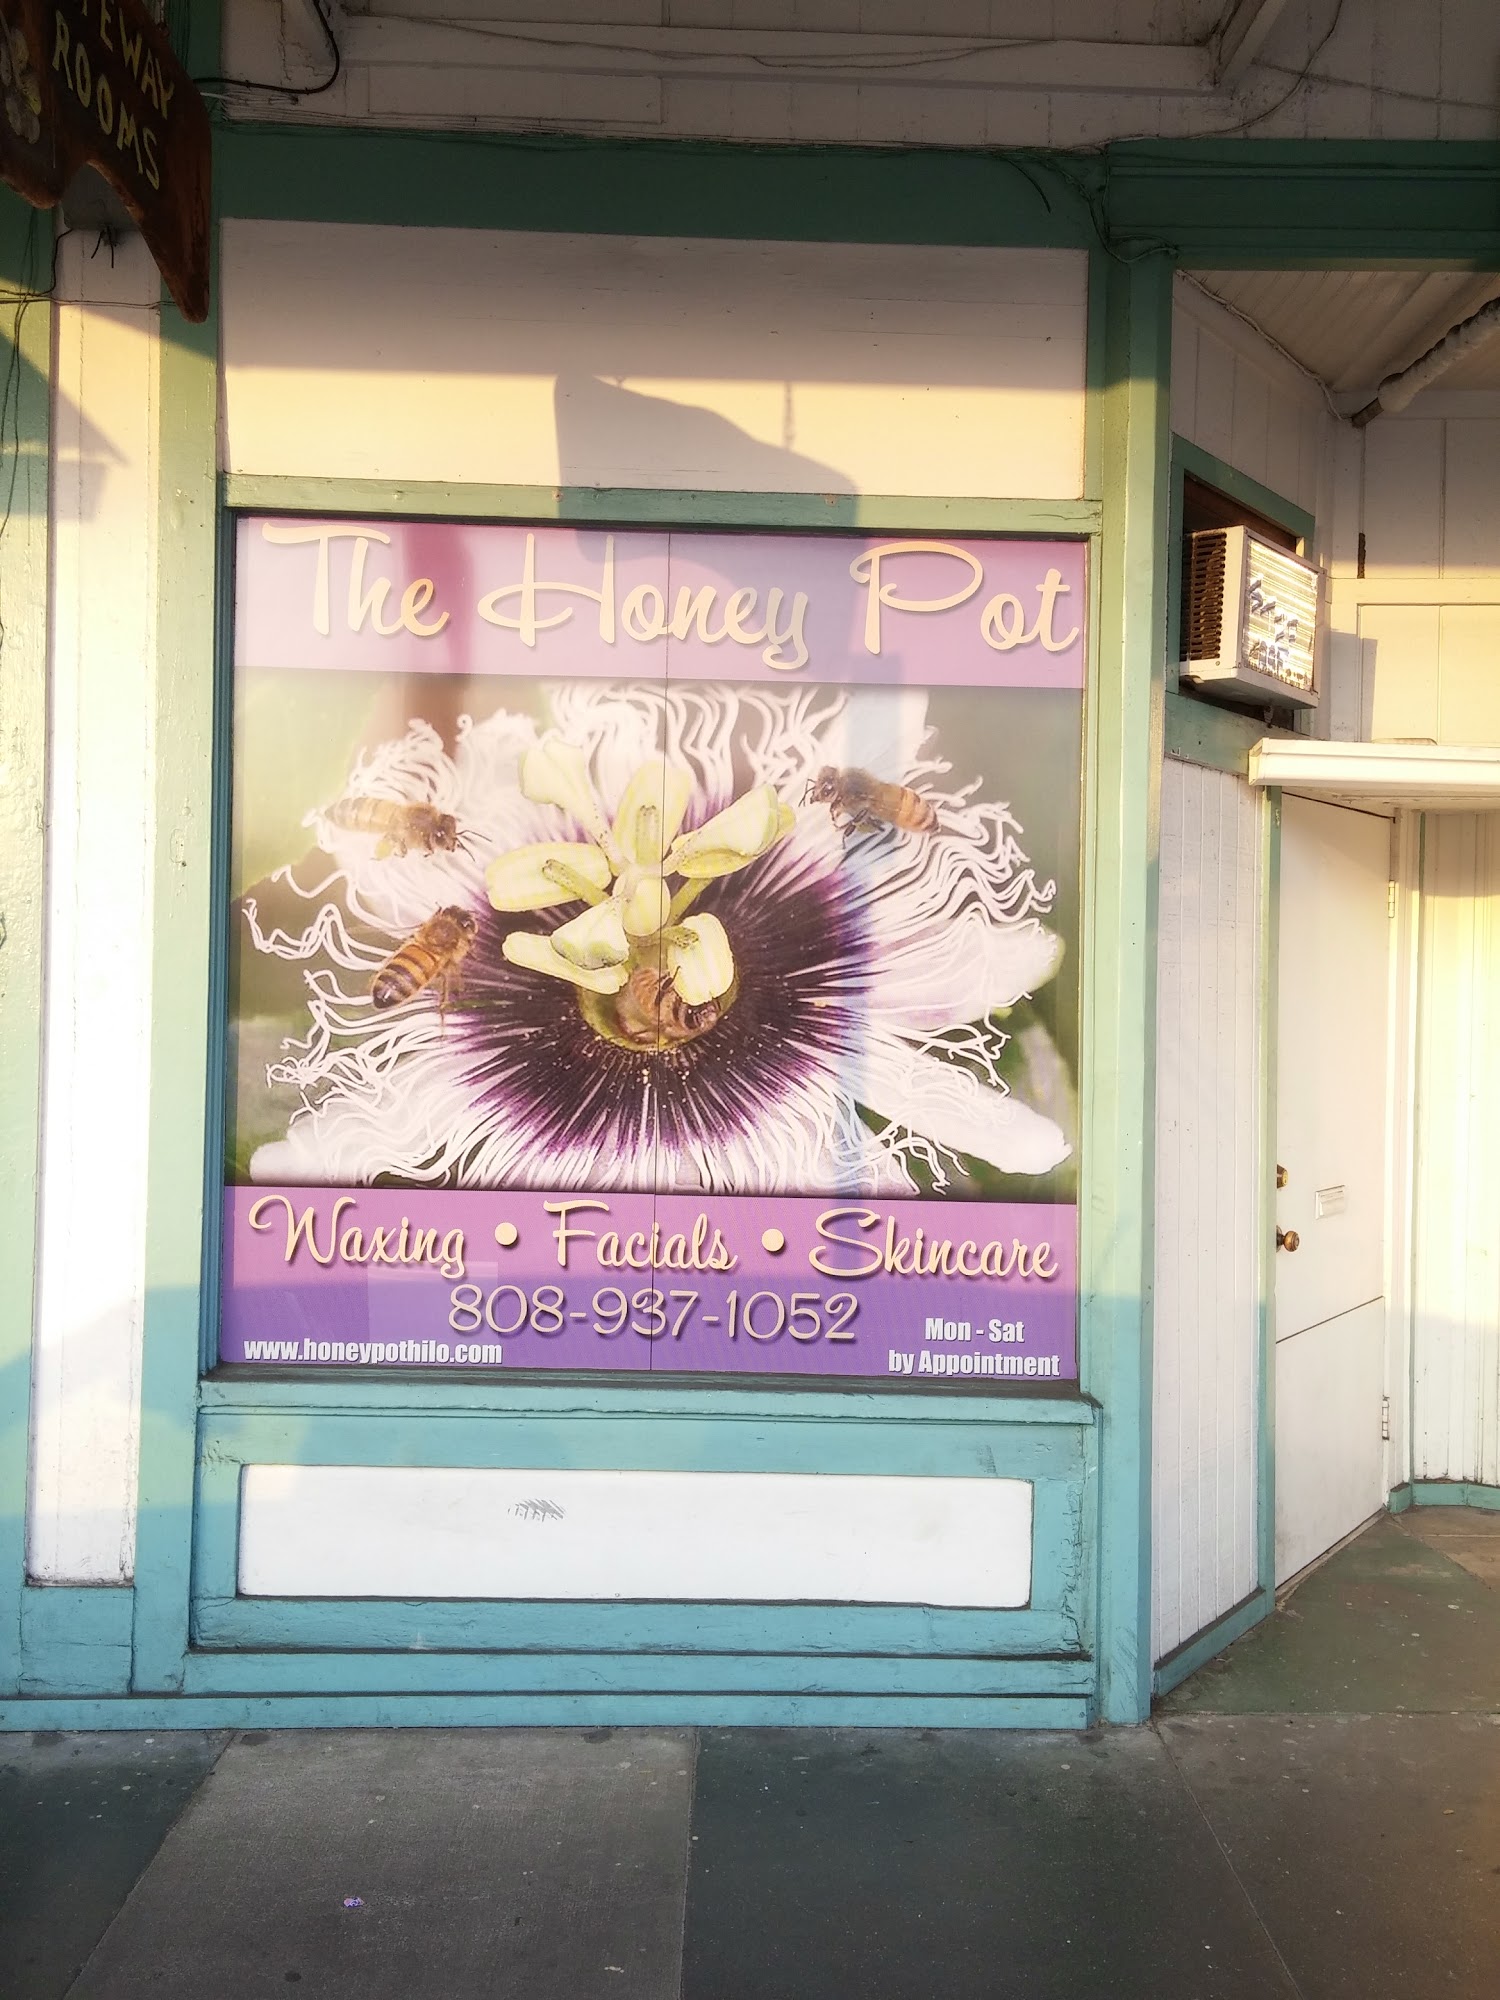 The Honey Pot Brazilian Waxing & Skincare ( by appointment only)